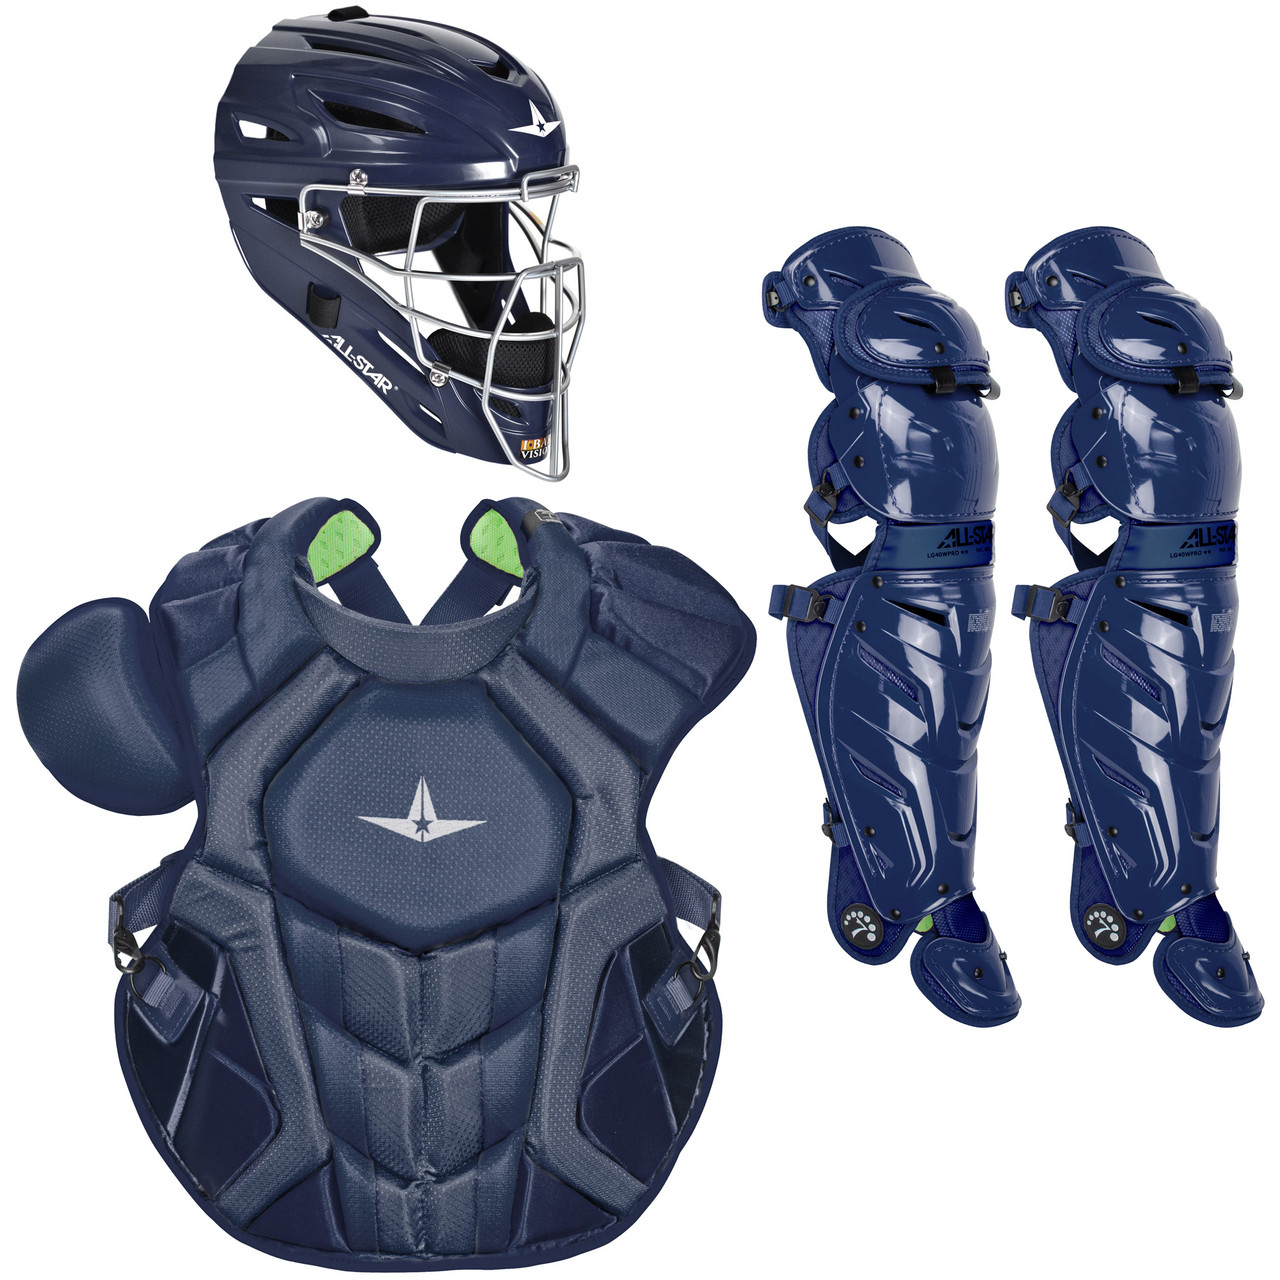 All-Star System7 Axis NOCSAE Youth Baseball Catcher's Set Solid Black